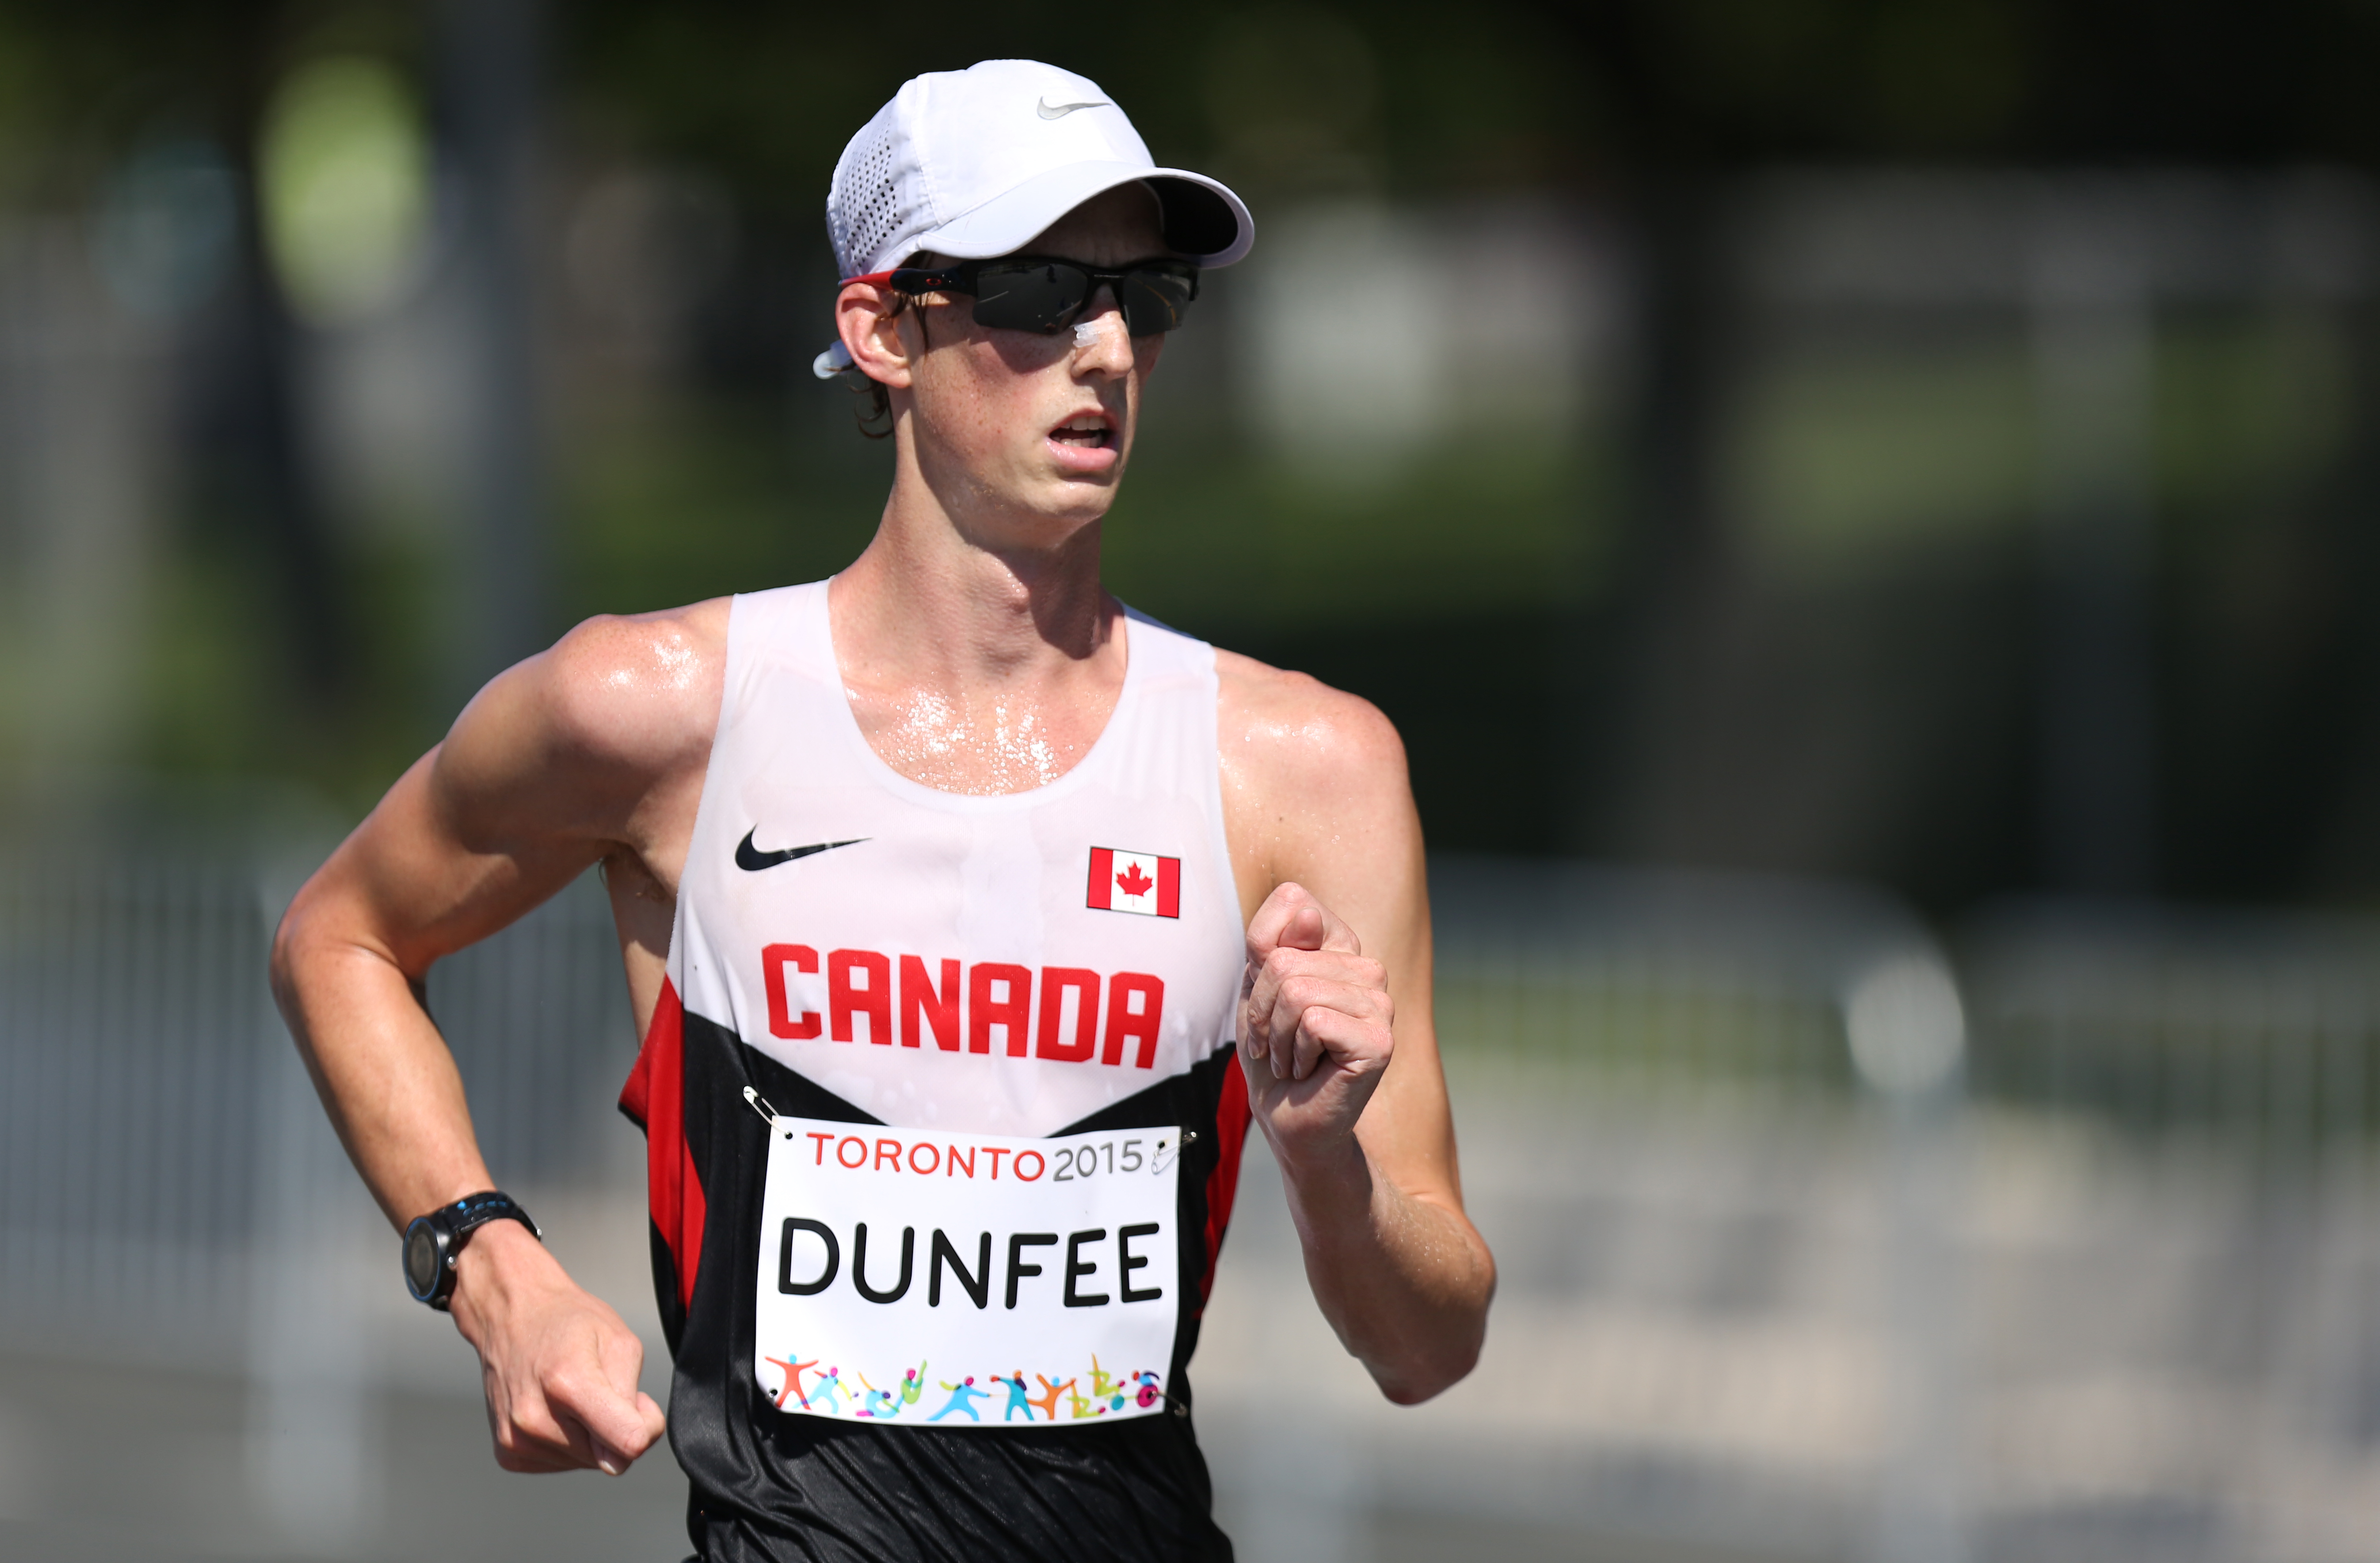 Dunfee in a racewalk with sunglasses and hat on